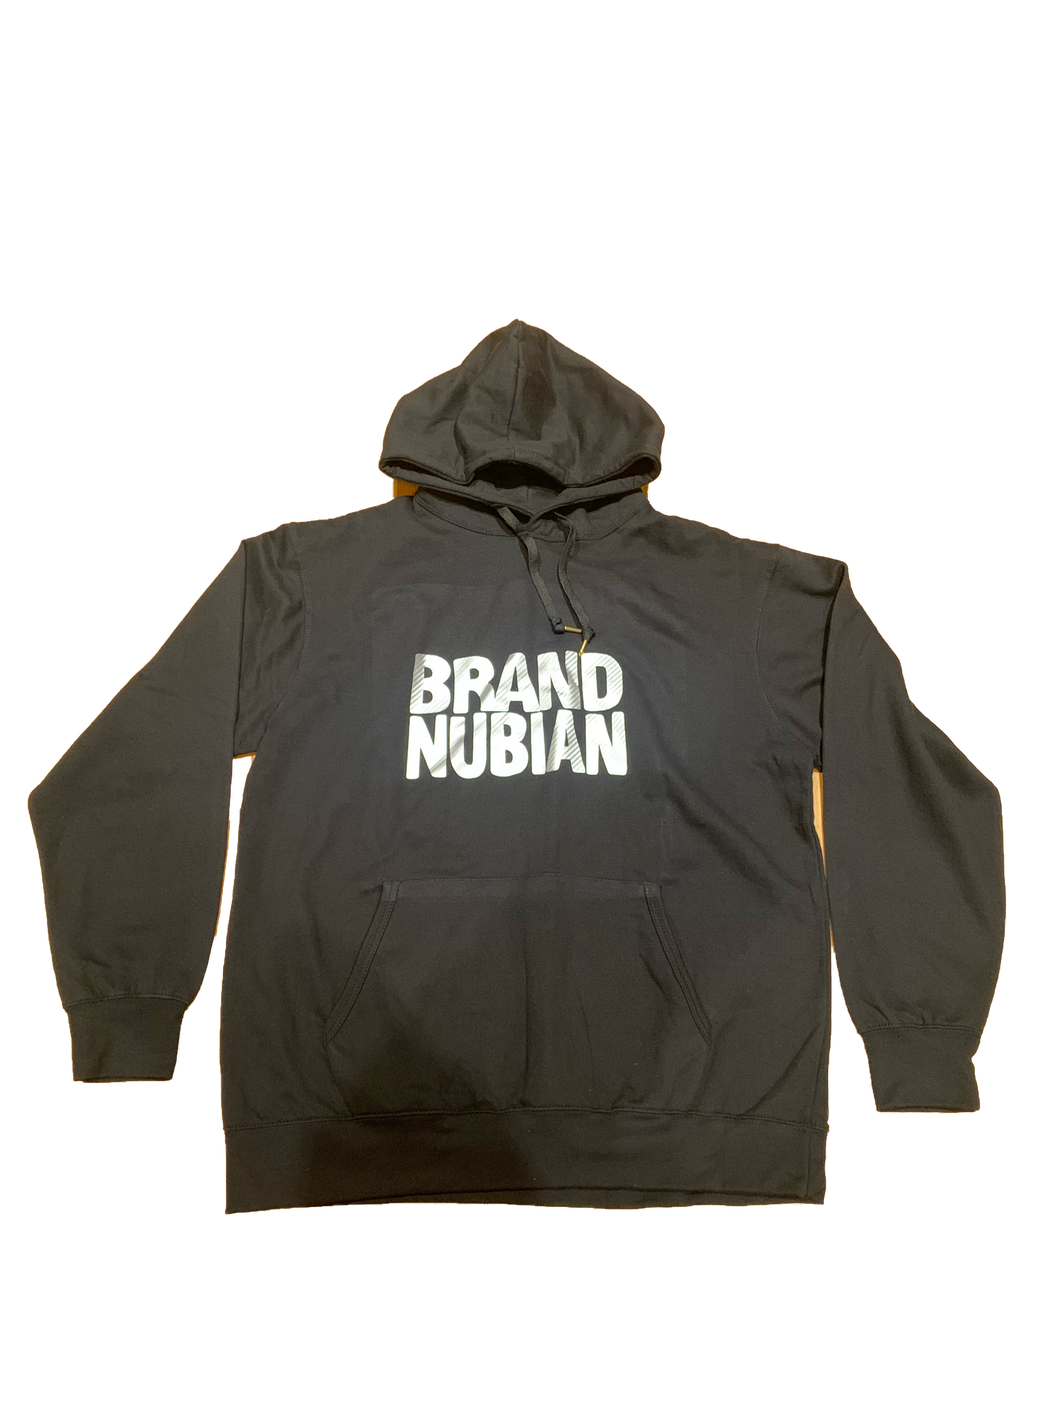 Brand Nubian Hoodie Bamboo silver Edition